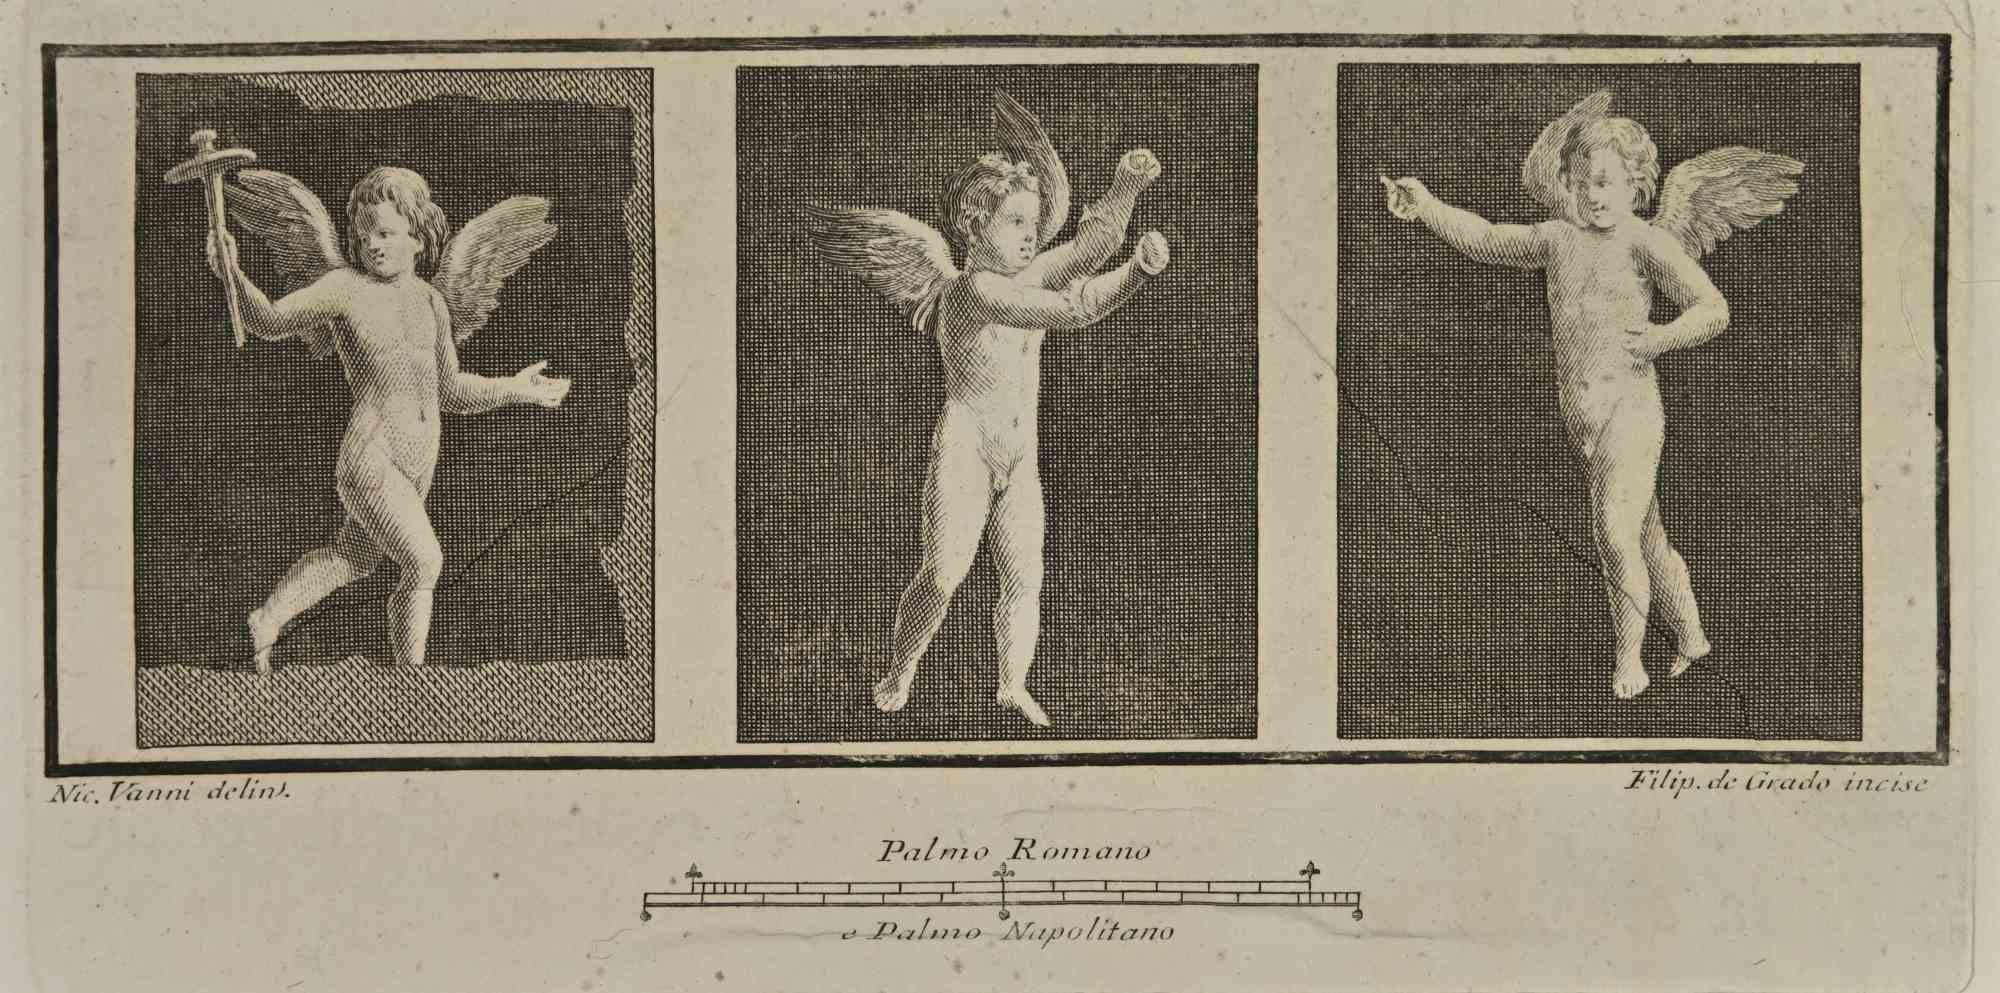 Cupid In Pompeian Fresco from "Antiquities of Herculaneum" is an etching on paper realized by Filippo De Grado in the 18th Century.

Signed on the plate.

Good conditions with some folding.

The etching belongs to the print suite “Antiquities of